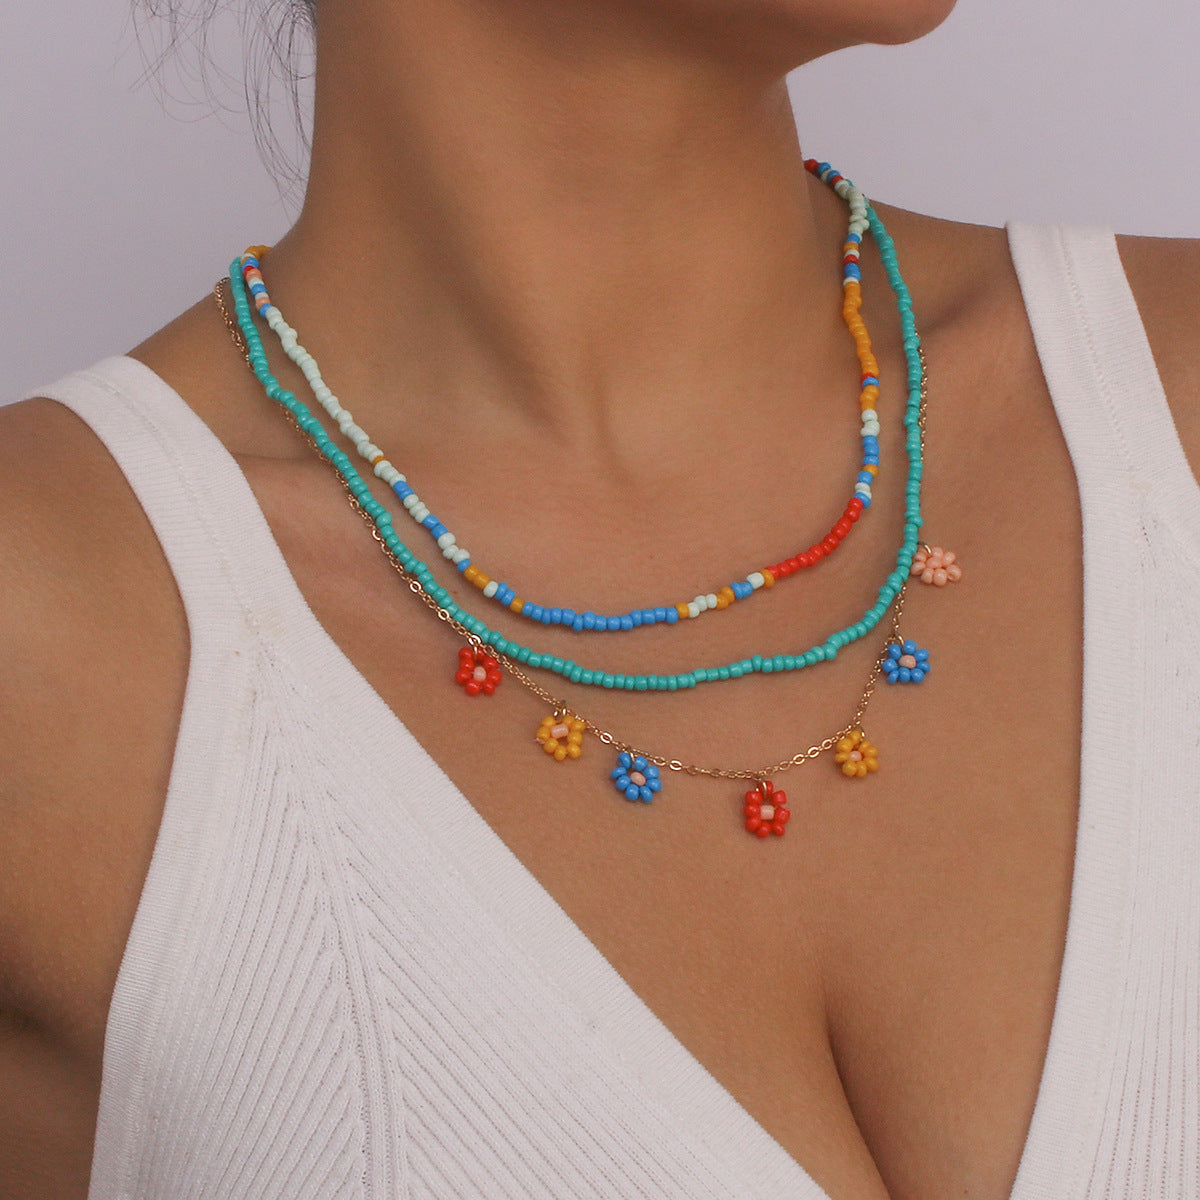 Ethnic style rice bead necklace flower holiday style clavicle chain jewelry